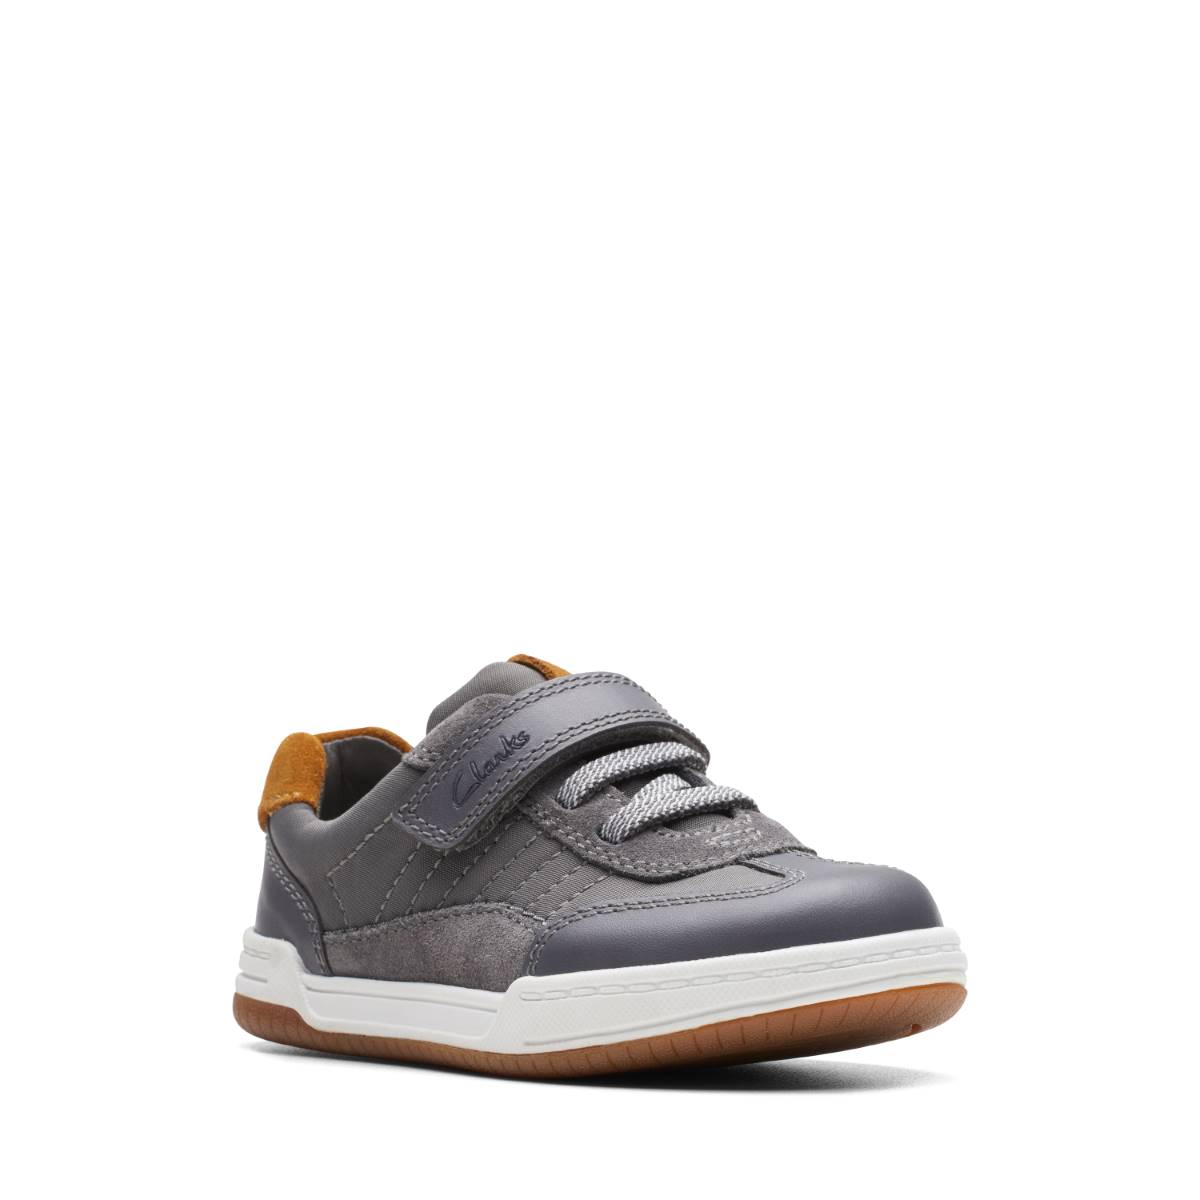 Clarks Fawn Family T Grey leather Kids Boys Toddler Shoes 7512-87G in a Plain Leather in Size 6.5